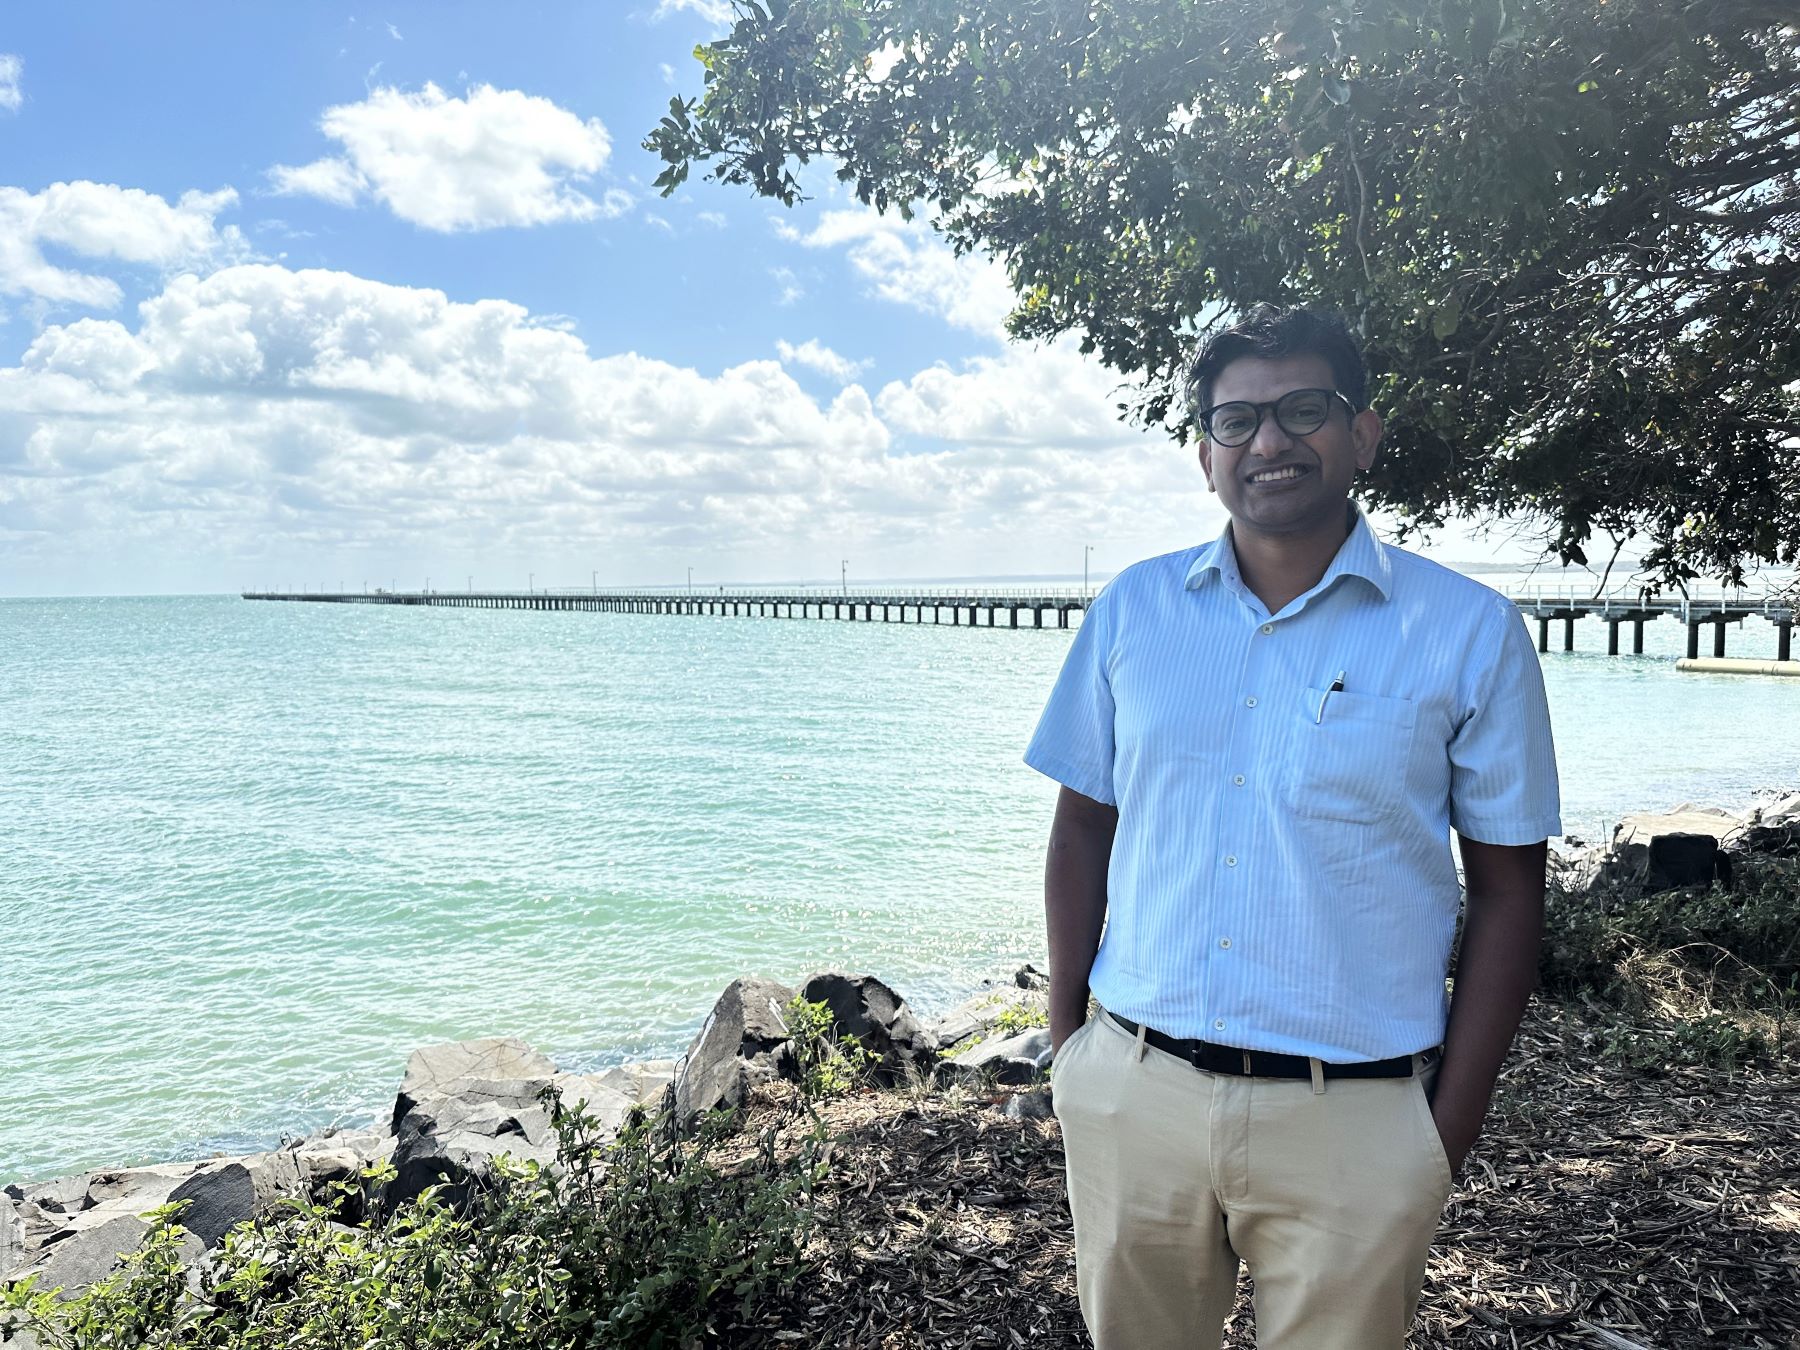 Hervey Bay Hospital Workplace-Based Assessment (WBA) Clinical Lead, Dr Ajith Thampi says the WBA pathway is helping provide more doctors for regional Queensland hospitals and general practices.